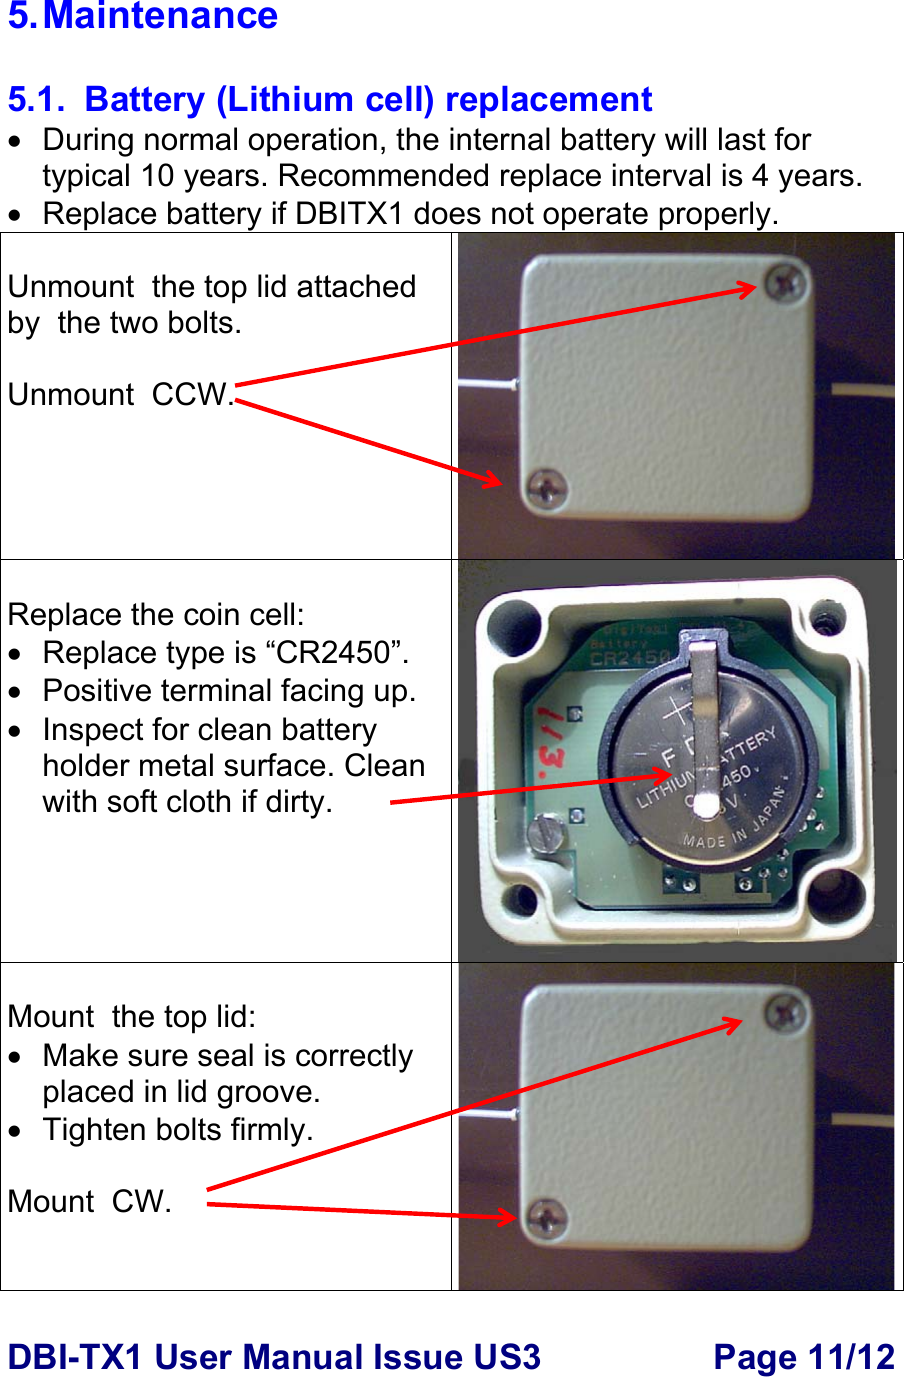 DBI-TX1 User Manual Issue US3  Page 11/12 5. Maintenance  5.1.  Battery (Lithium cell) replacement •  During normal operation, the internal battery will last for typical 10 years. Recommended replace interval is 4 years. •  Replace battery if DBITX1 does not operate properly.  Unmount  the top lid attached by  the two bolts.  Unmount  CCW.  Replace the coin cell: •  Replace type is “CR2450”.  • Positive terminal facing up. • Inspect for clean battery holder metal surface. Clean with soft cloth if dirty.  Mount  the top lid: • Make sure seal is correctly placed in lid groove. •  Tighten bolts firmly.   Mount  CW. 